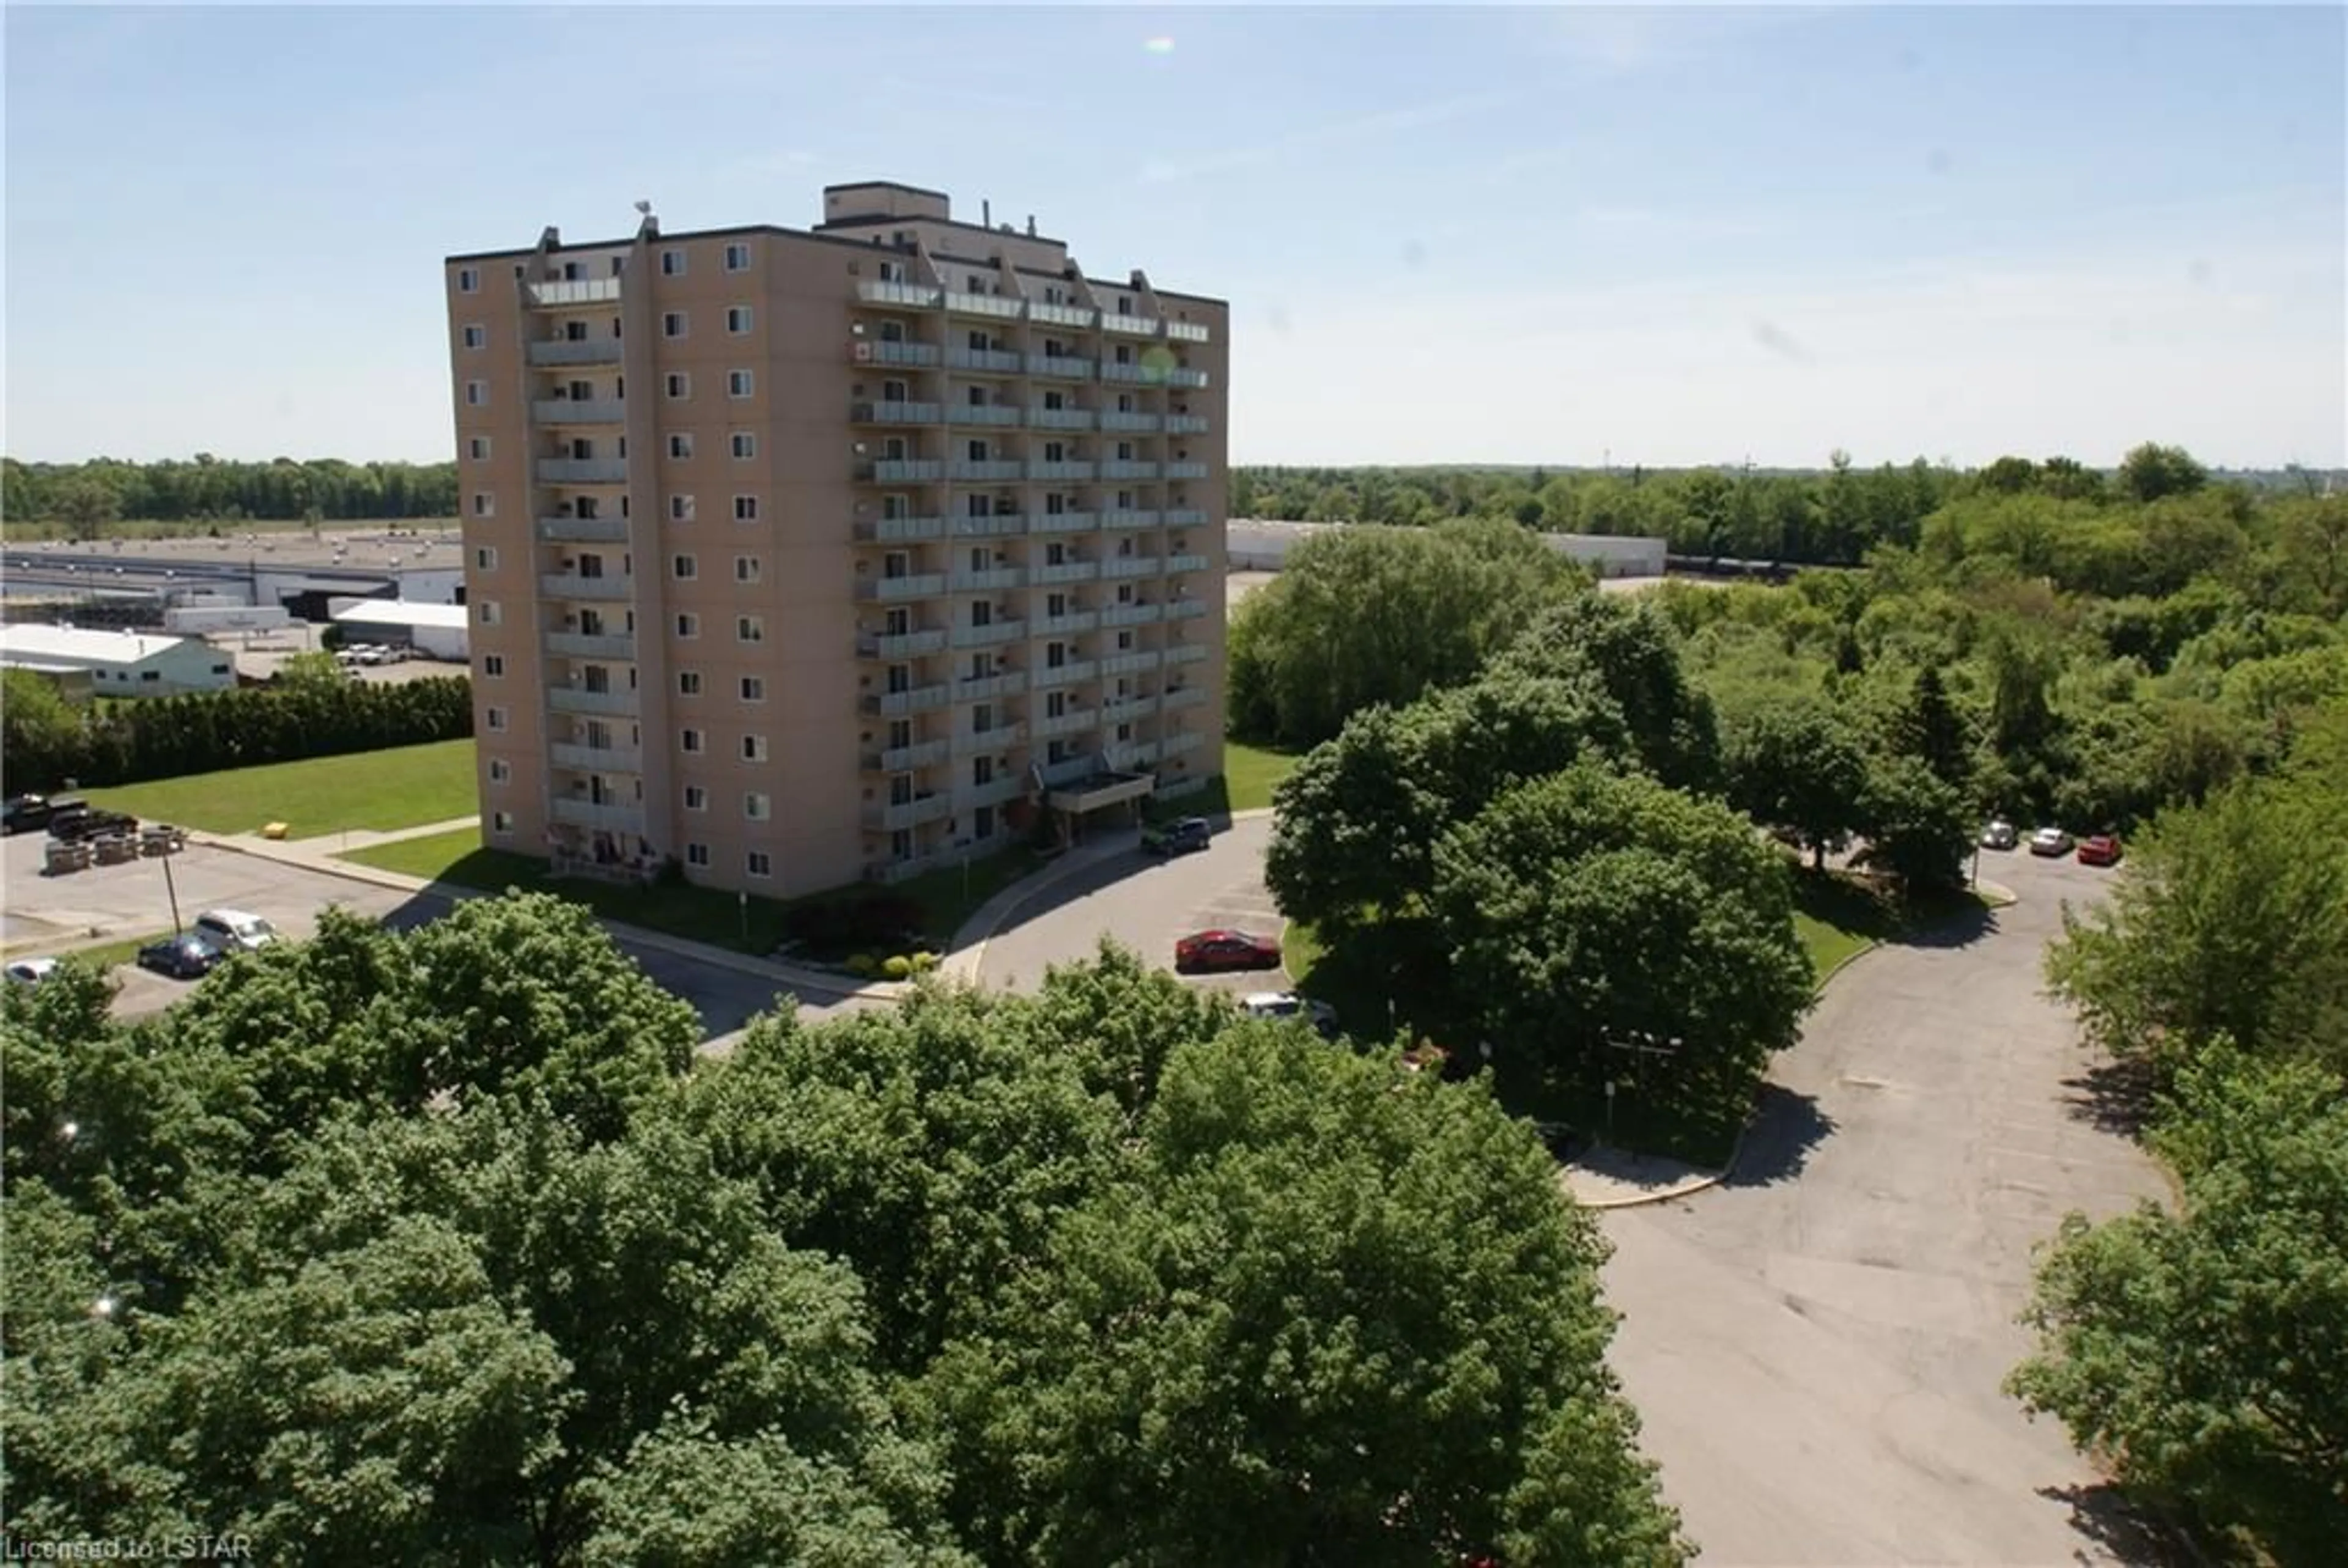 Outside view for 573 Mornington Ave #605, London Ontario N5Y 4T9